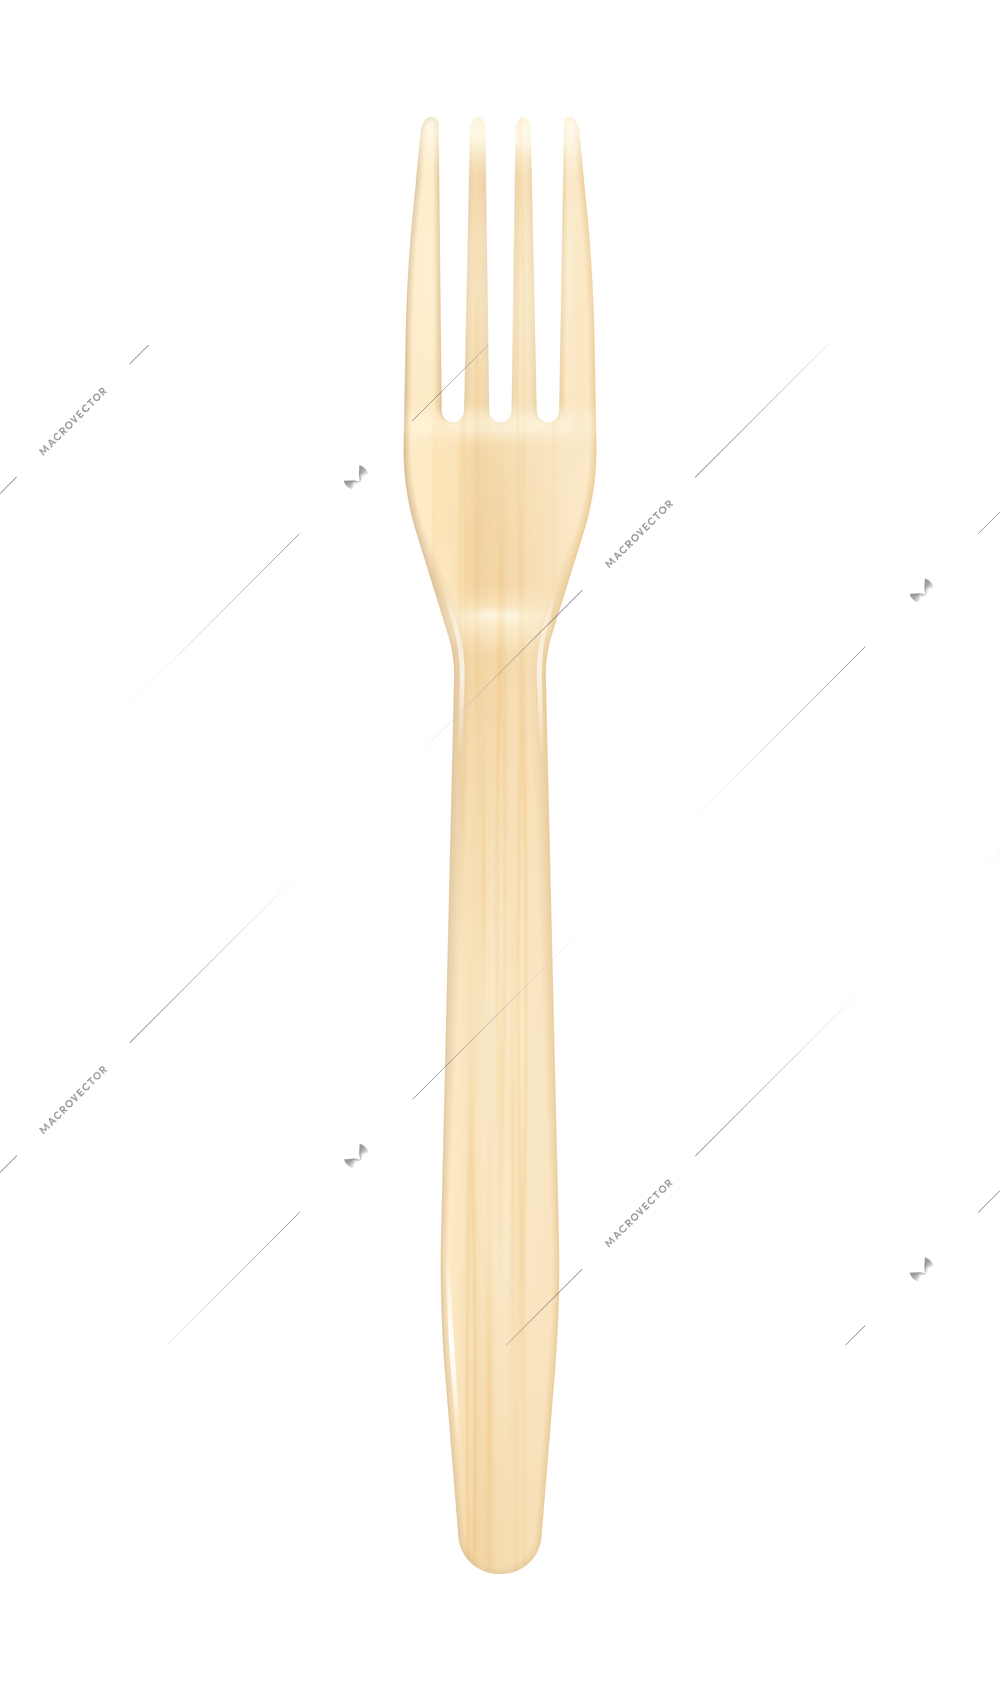 Eco disposable tableware realistic composition with isolated image of wooden fork vector illustration